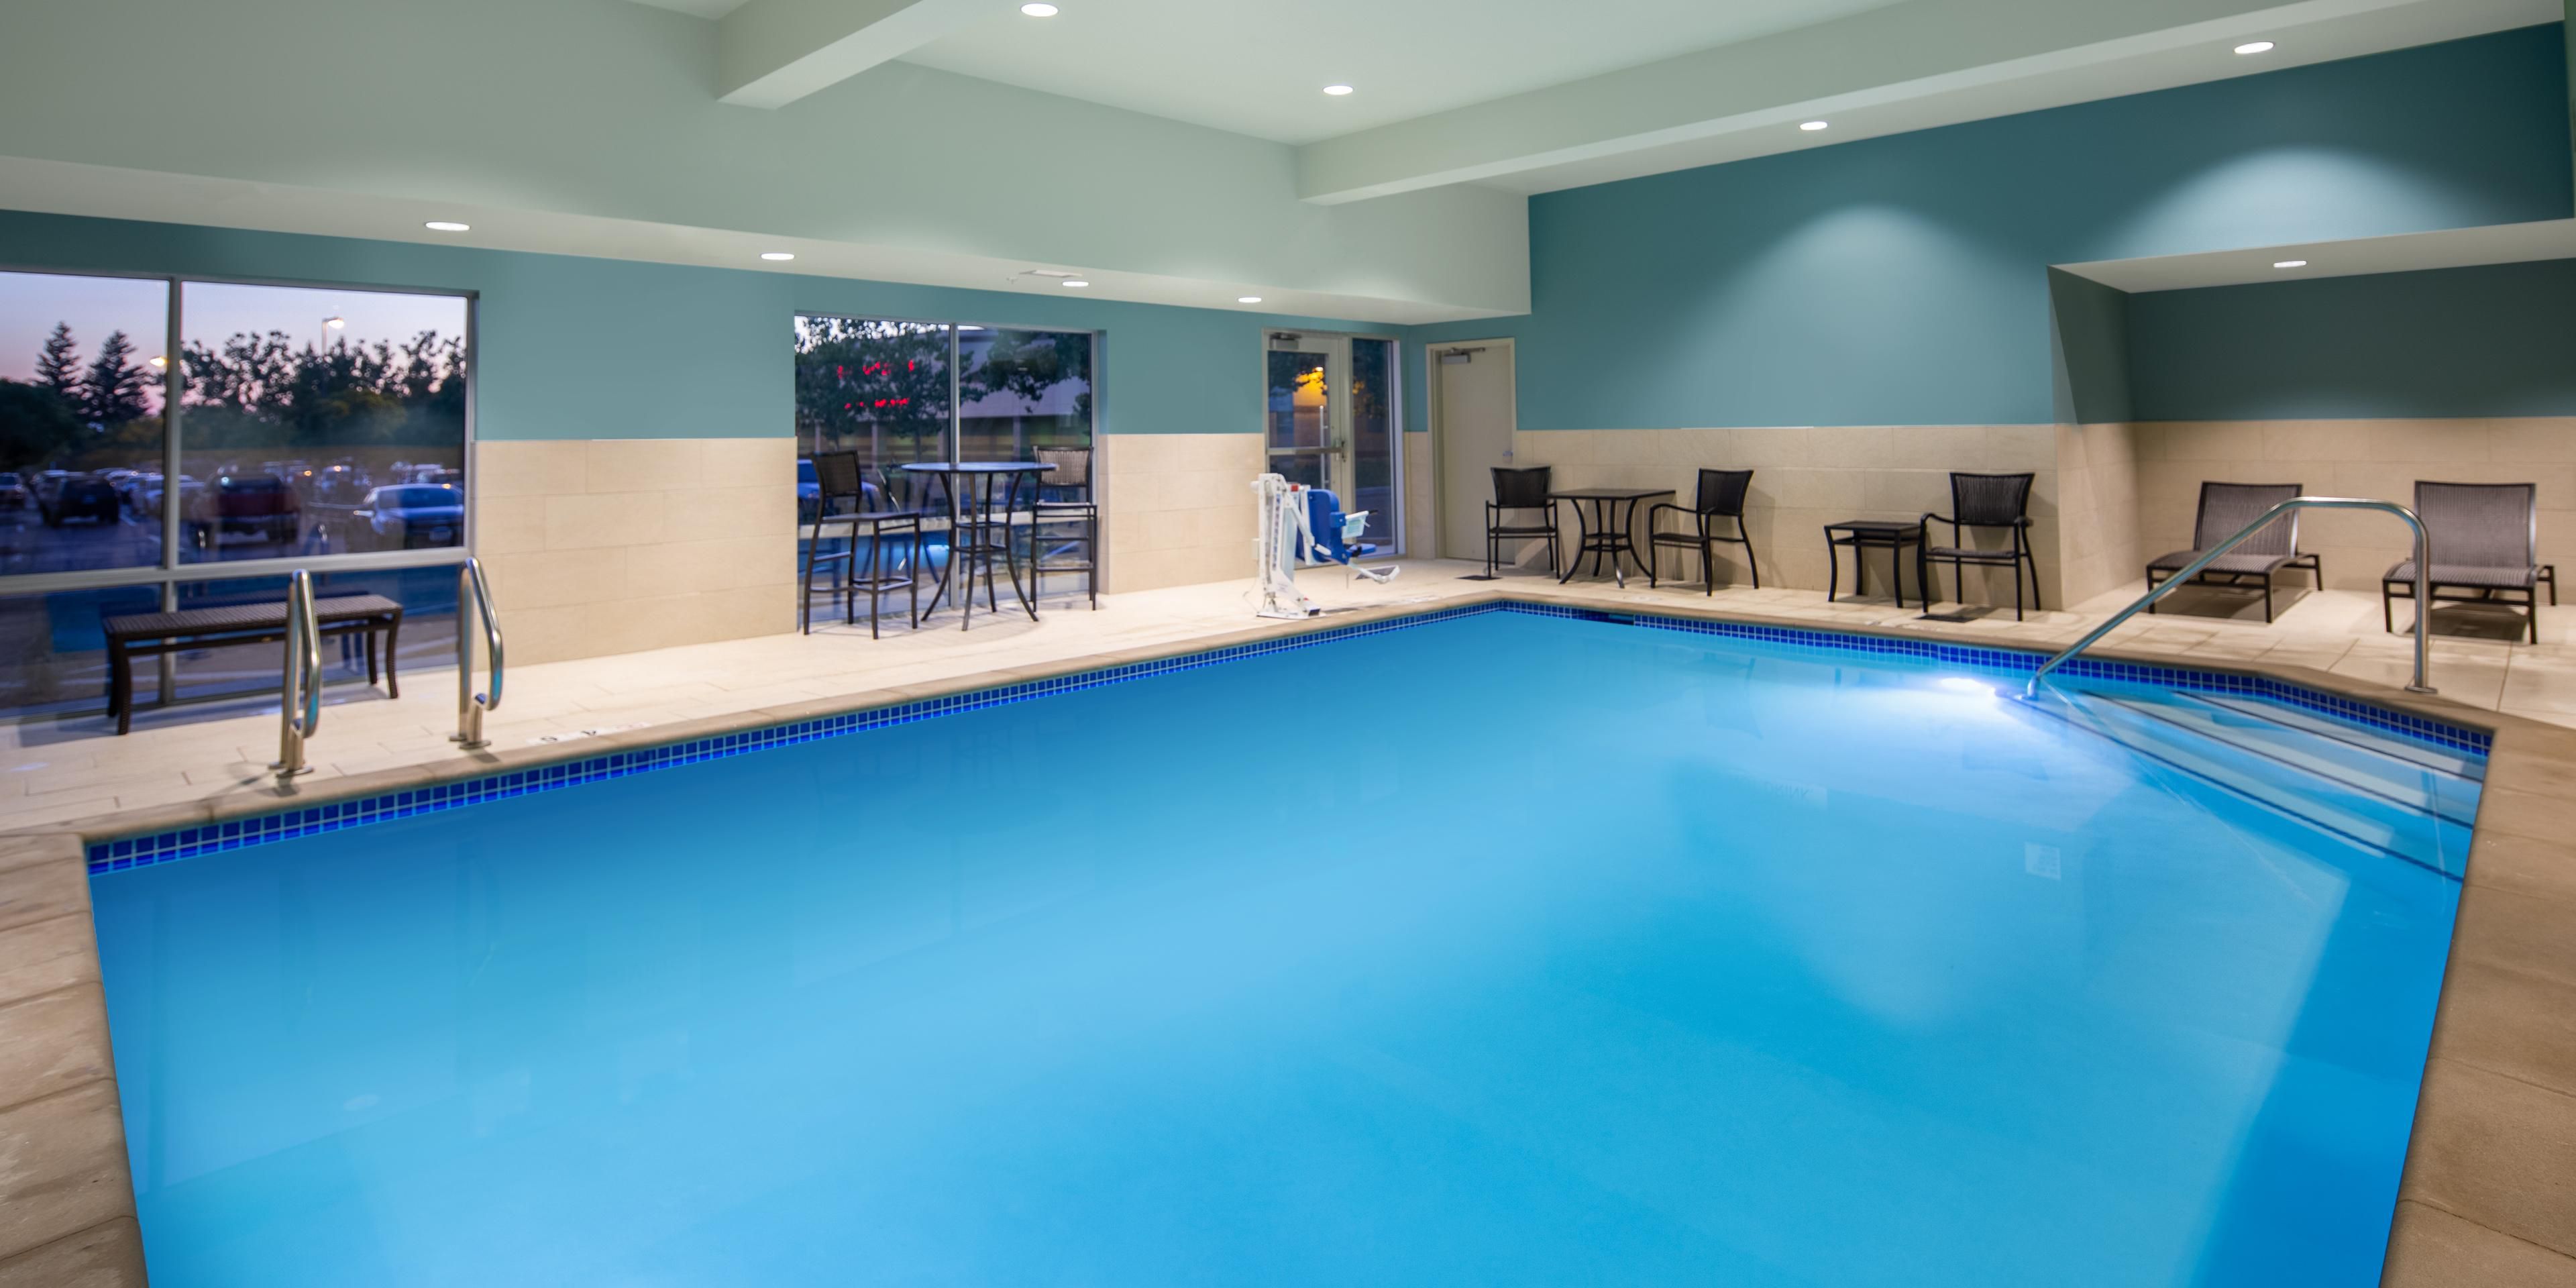 Take a dip in our indoor swimming pool, open for your enjoyment.